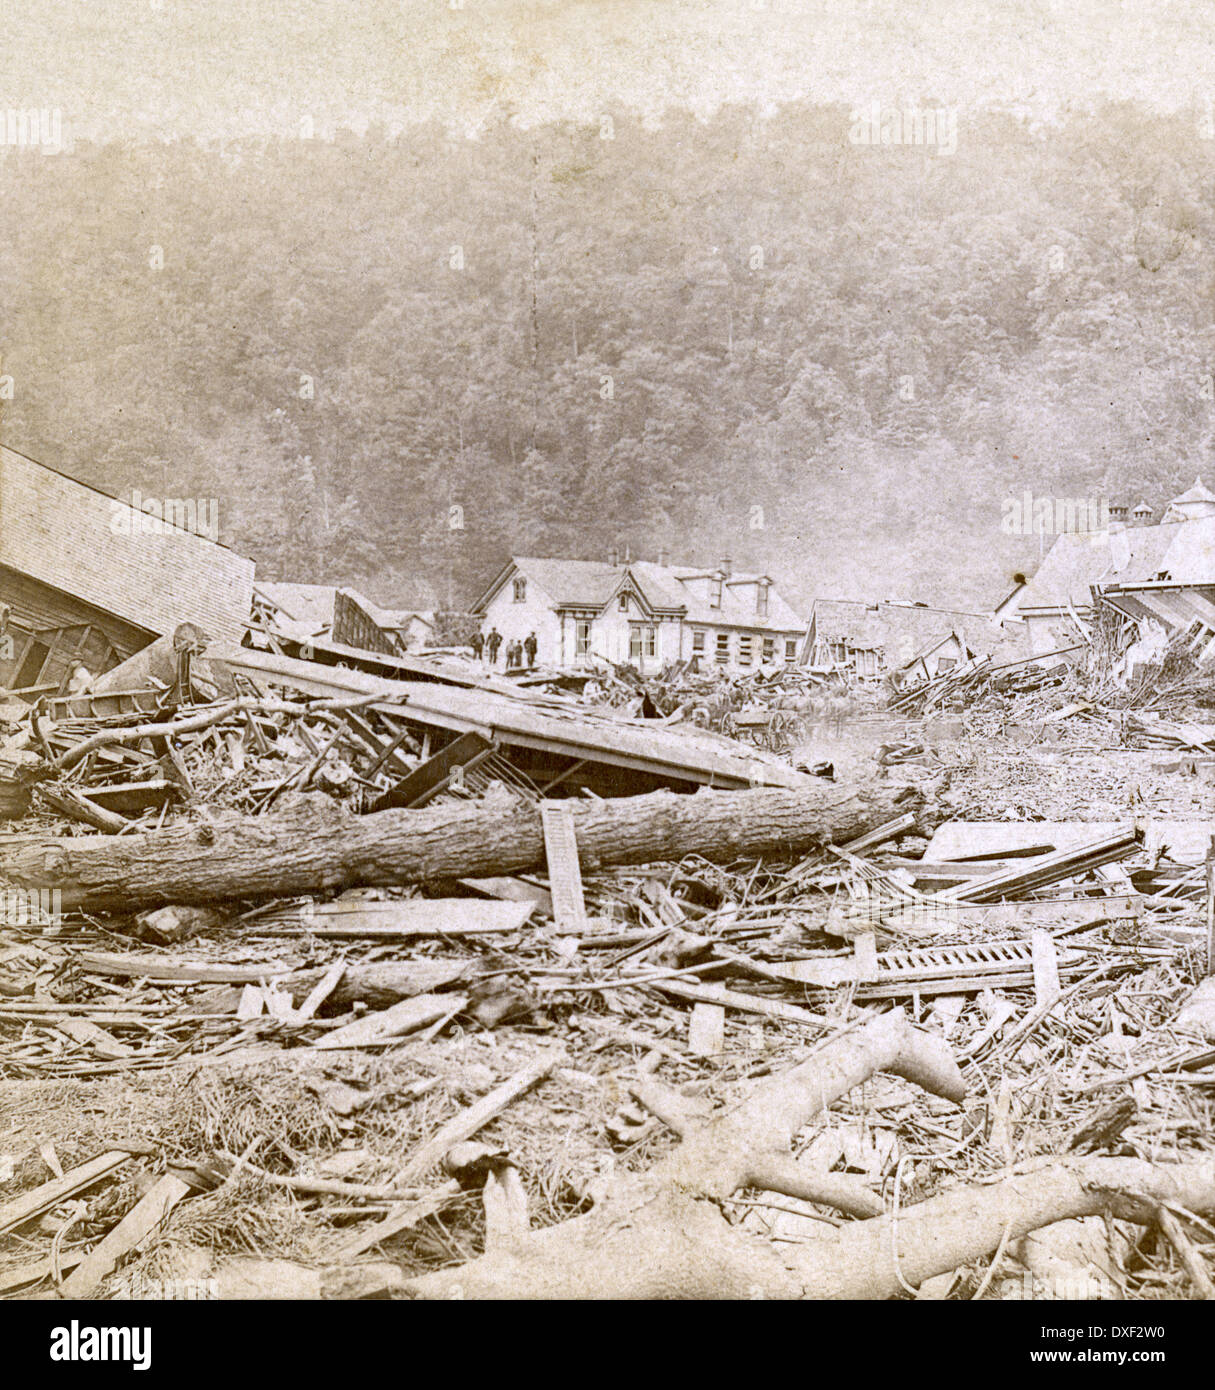 Circa 1890 antique photograph, the Great Johnstown Flood May 31, 1889 in Johnstown, Pennsylvania, PA, USA. Stock Photo